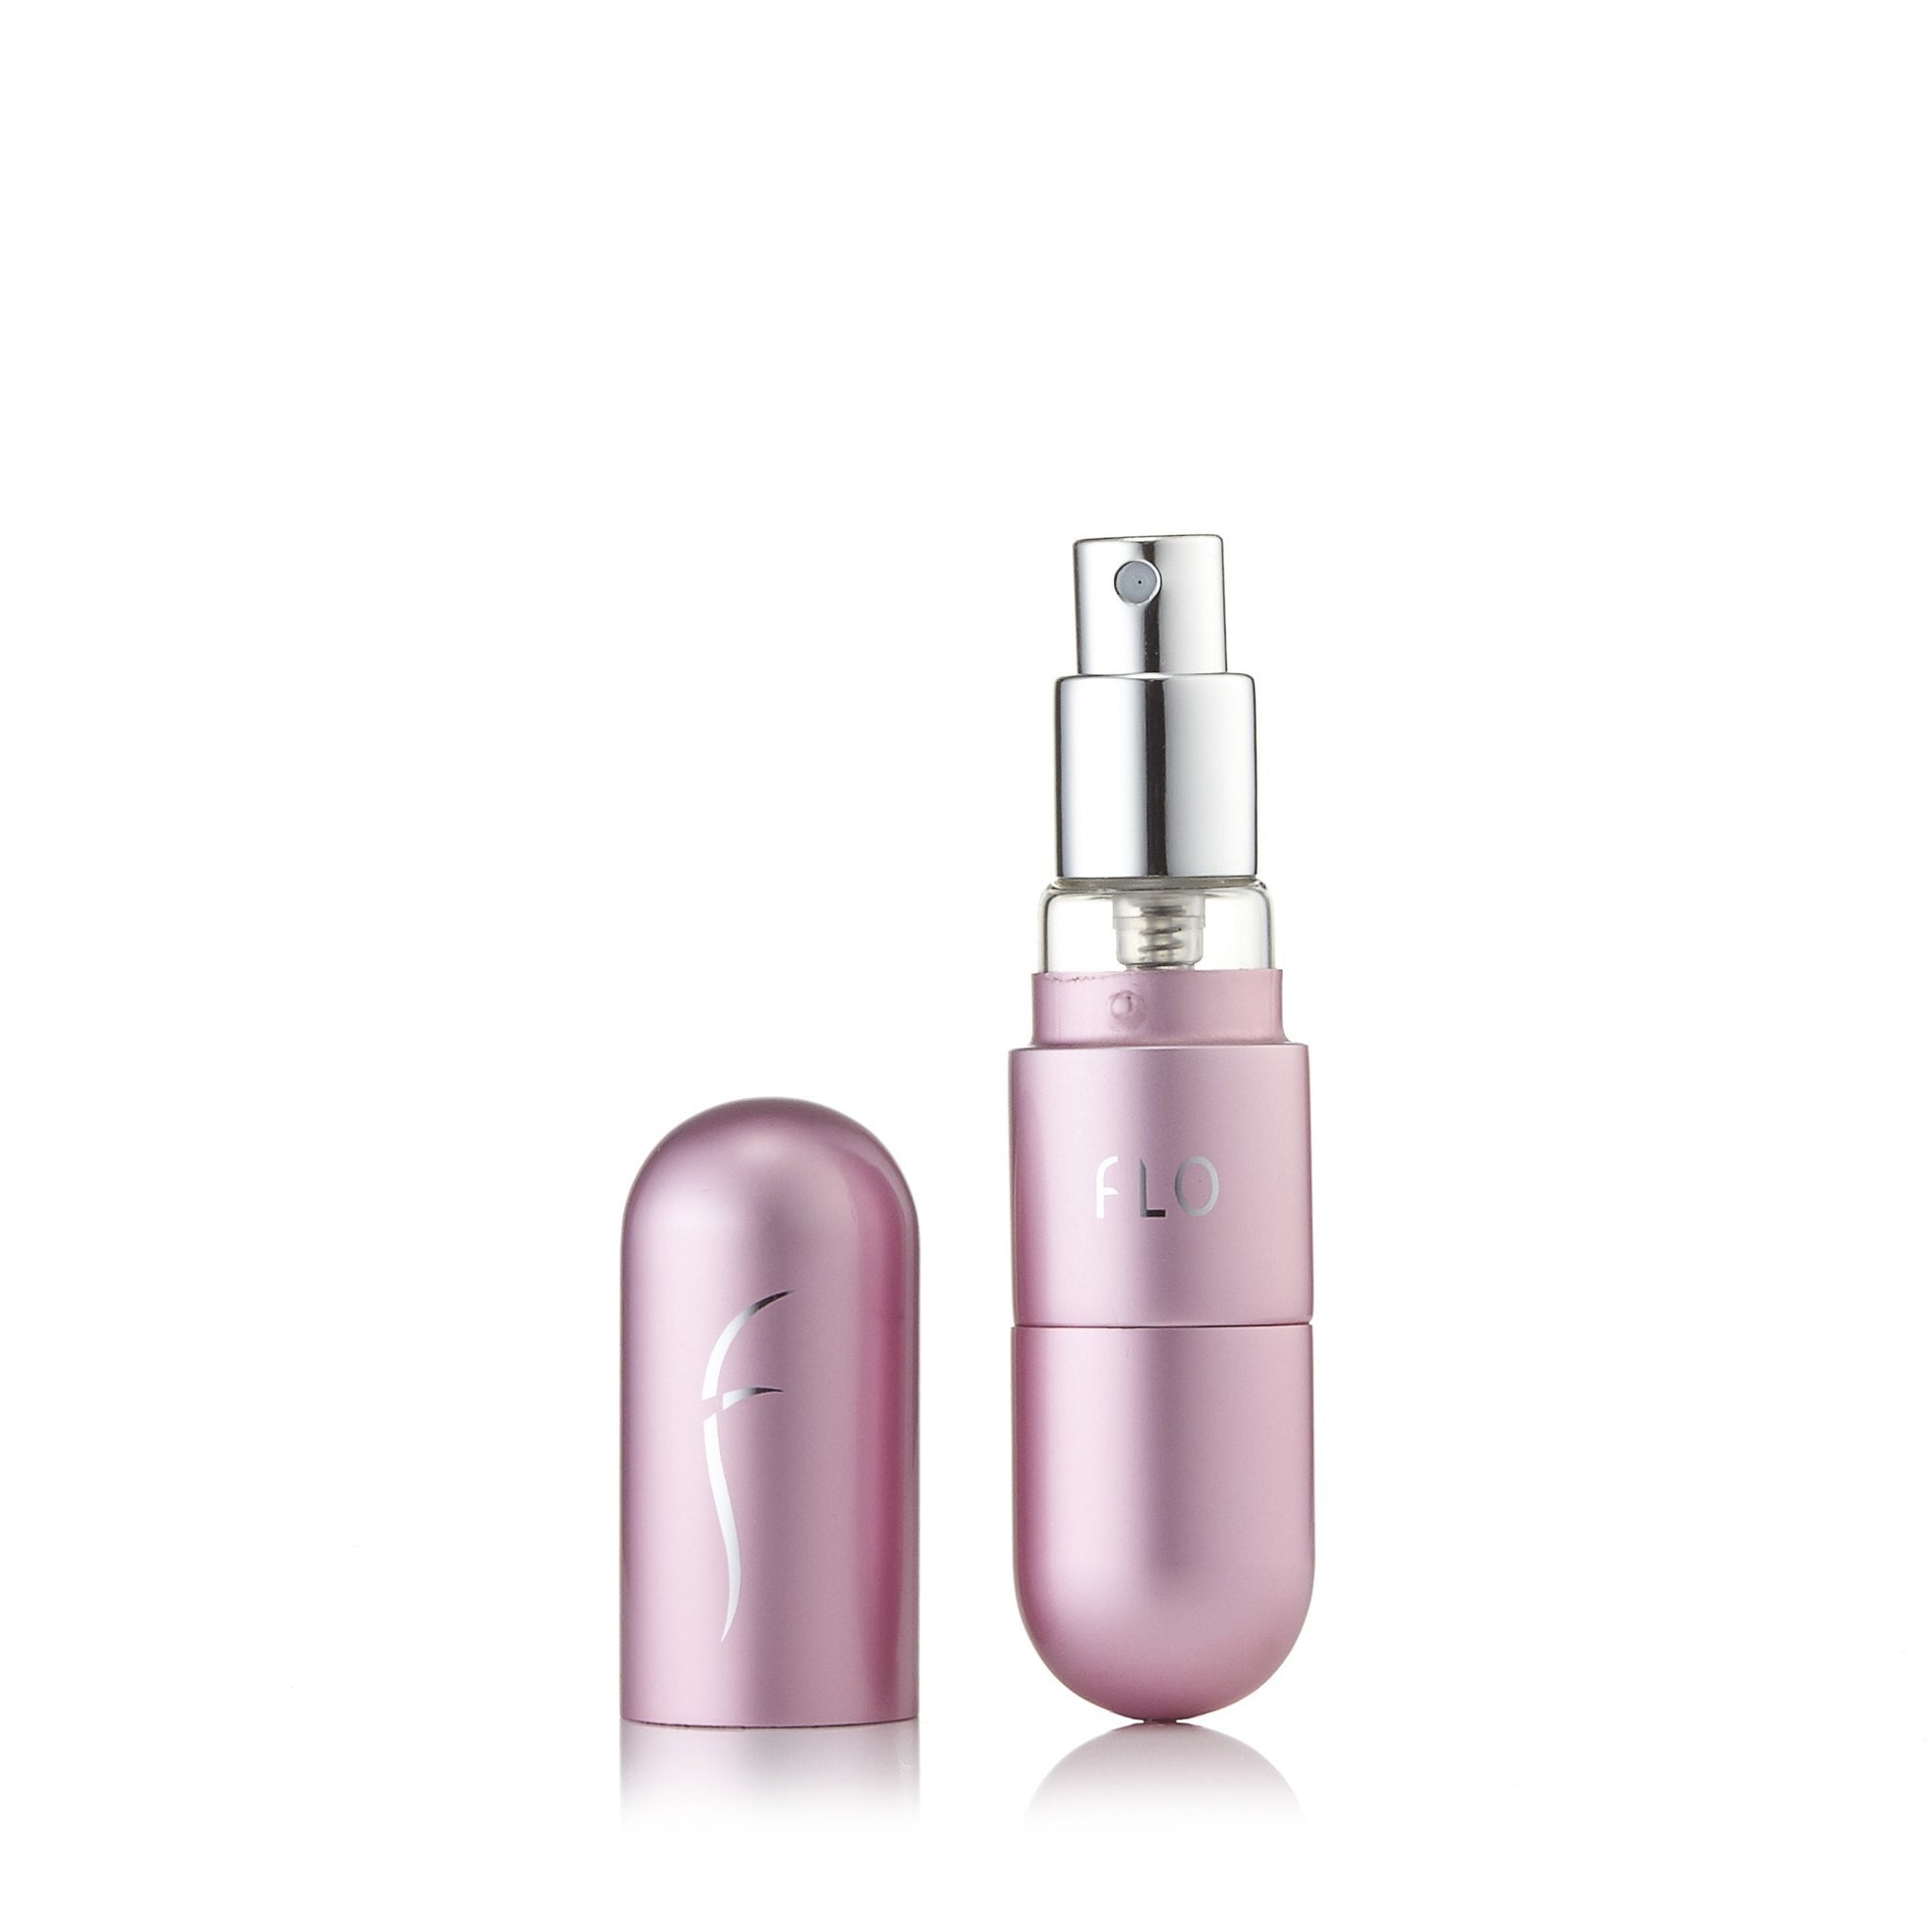 Refillable Perfume Atomizer by Flo Pink Click to open in modal